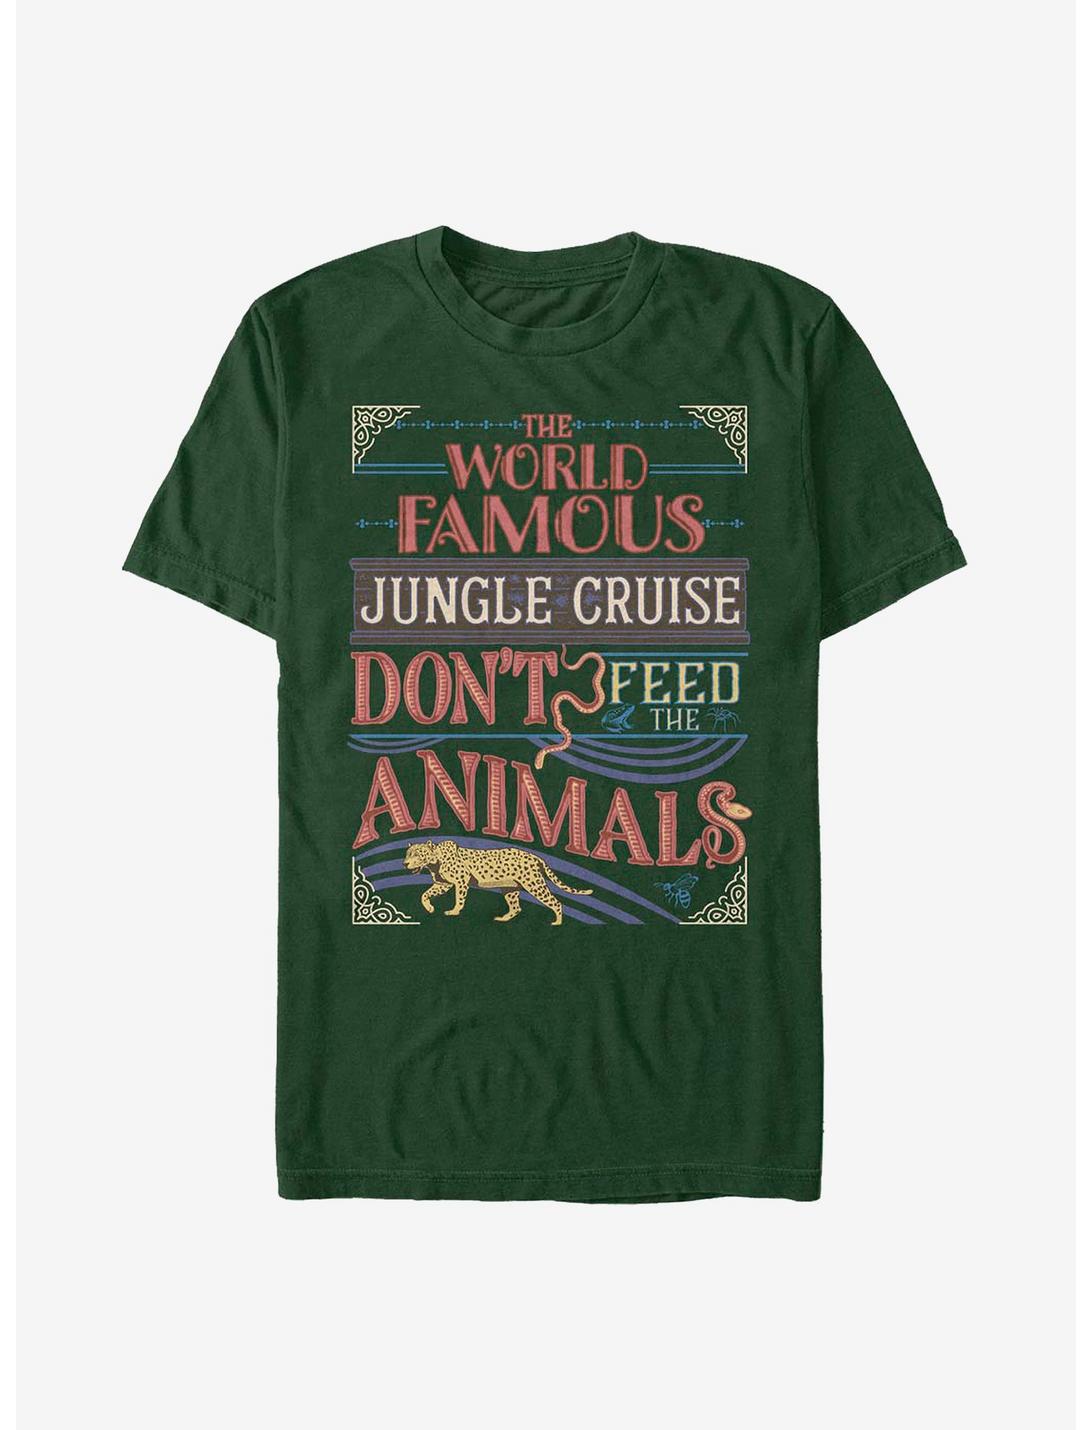 Disney Jungle Cruise The World Famous Jungle Cruise Don't Feed The Animals T-Shirt, FOREST GRN, hi-res